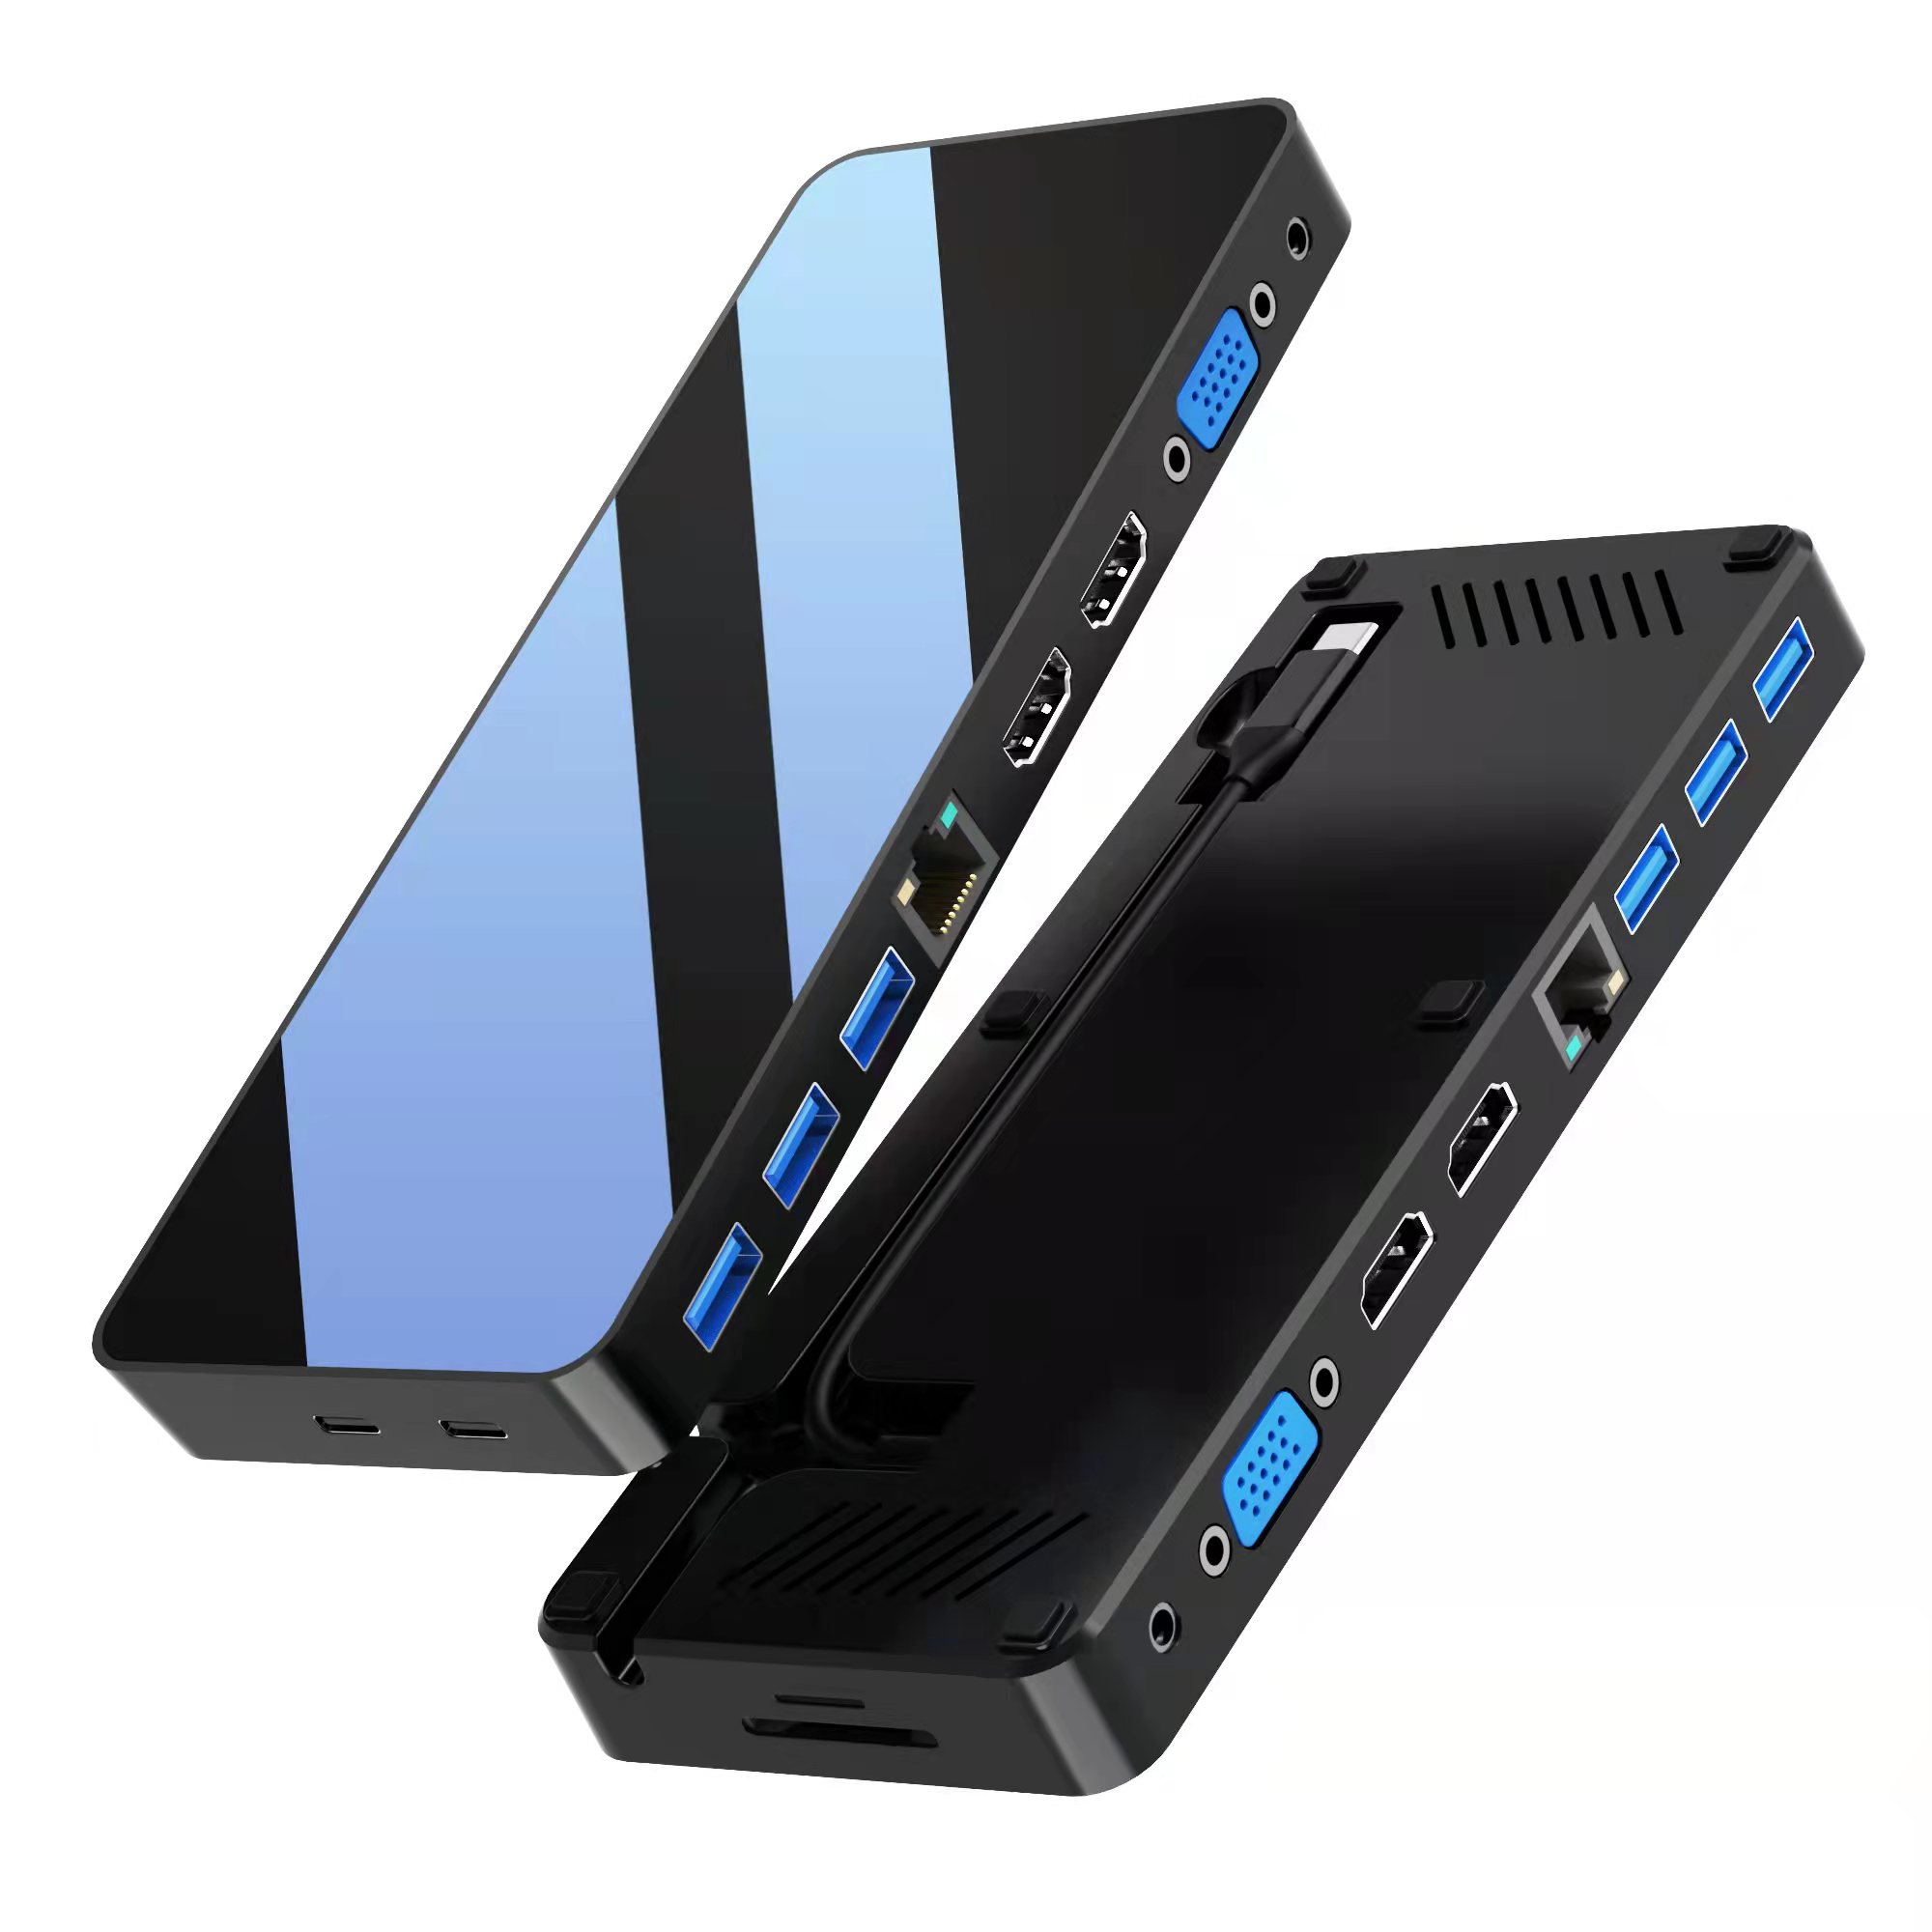 Mirror face 12 port usb c hub with 2 x HDMI 4K + VGA + PD 100W + Type C Data + 3xUSB A 3.0 + RJ45 1000Mbps + 3.5mm Audio + SD+TF card slot all in 1 docking station